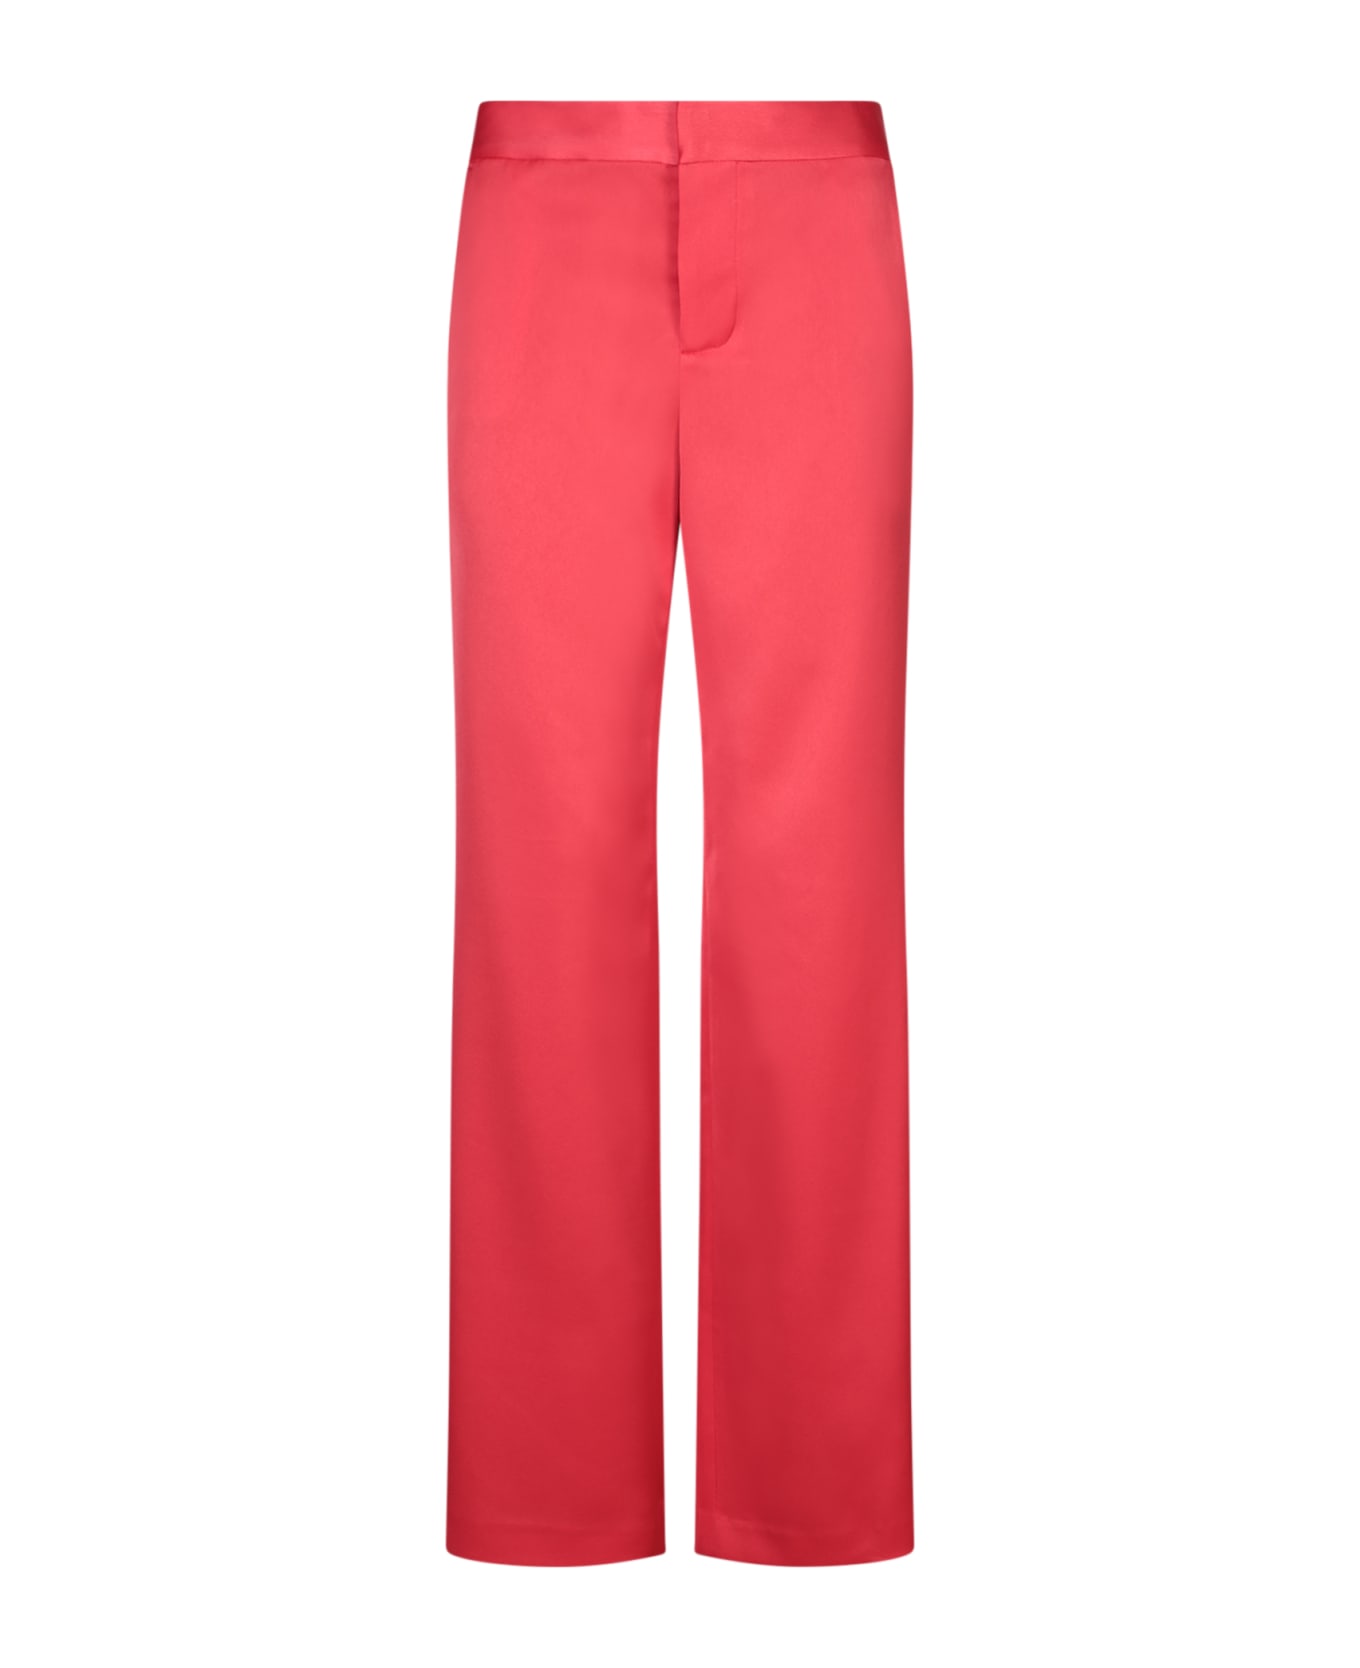 Alice + Olivia Red Satin Wide Leg Trousers Alice + Olivia - Red